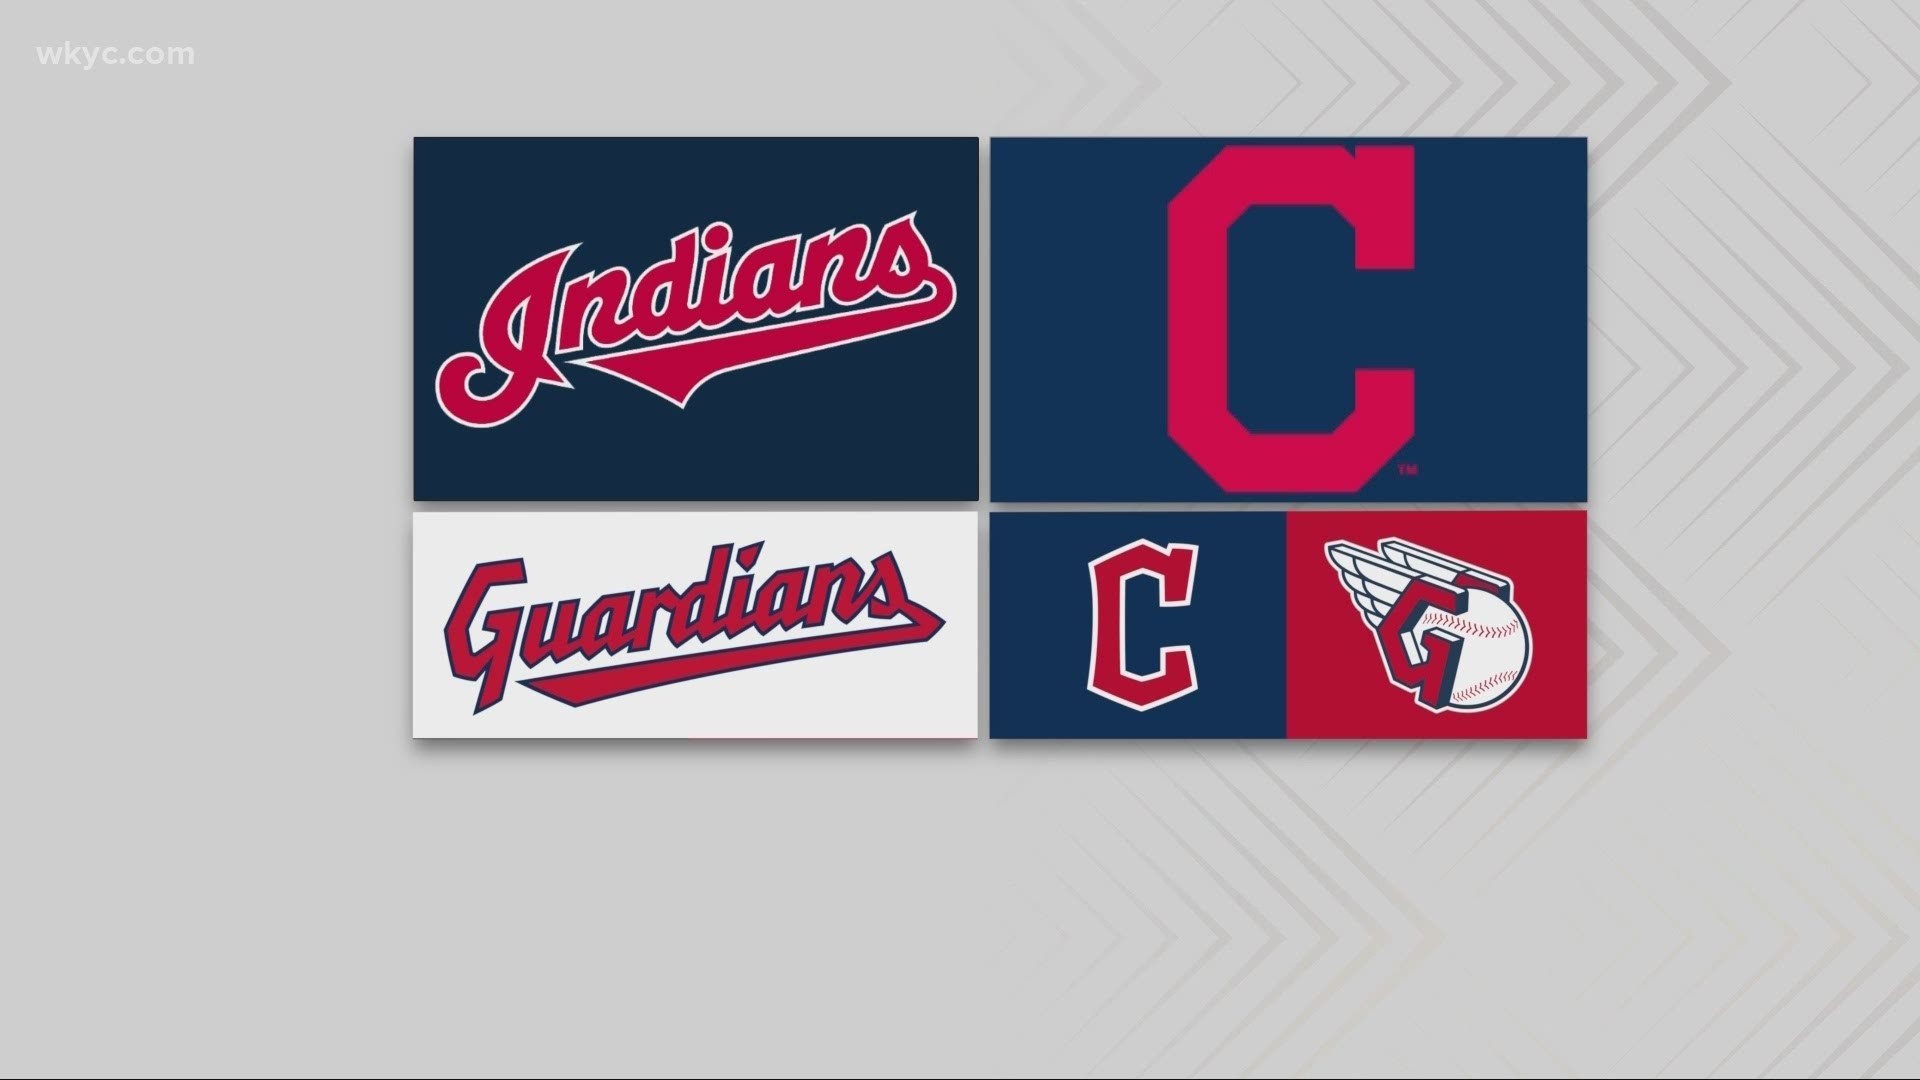 In a video released to social media on Friday, the franchise announced that it will be known as the "Cleveland Guardians" beginning in 2022.